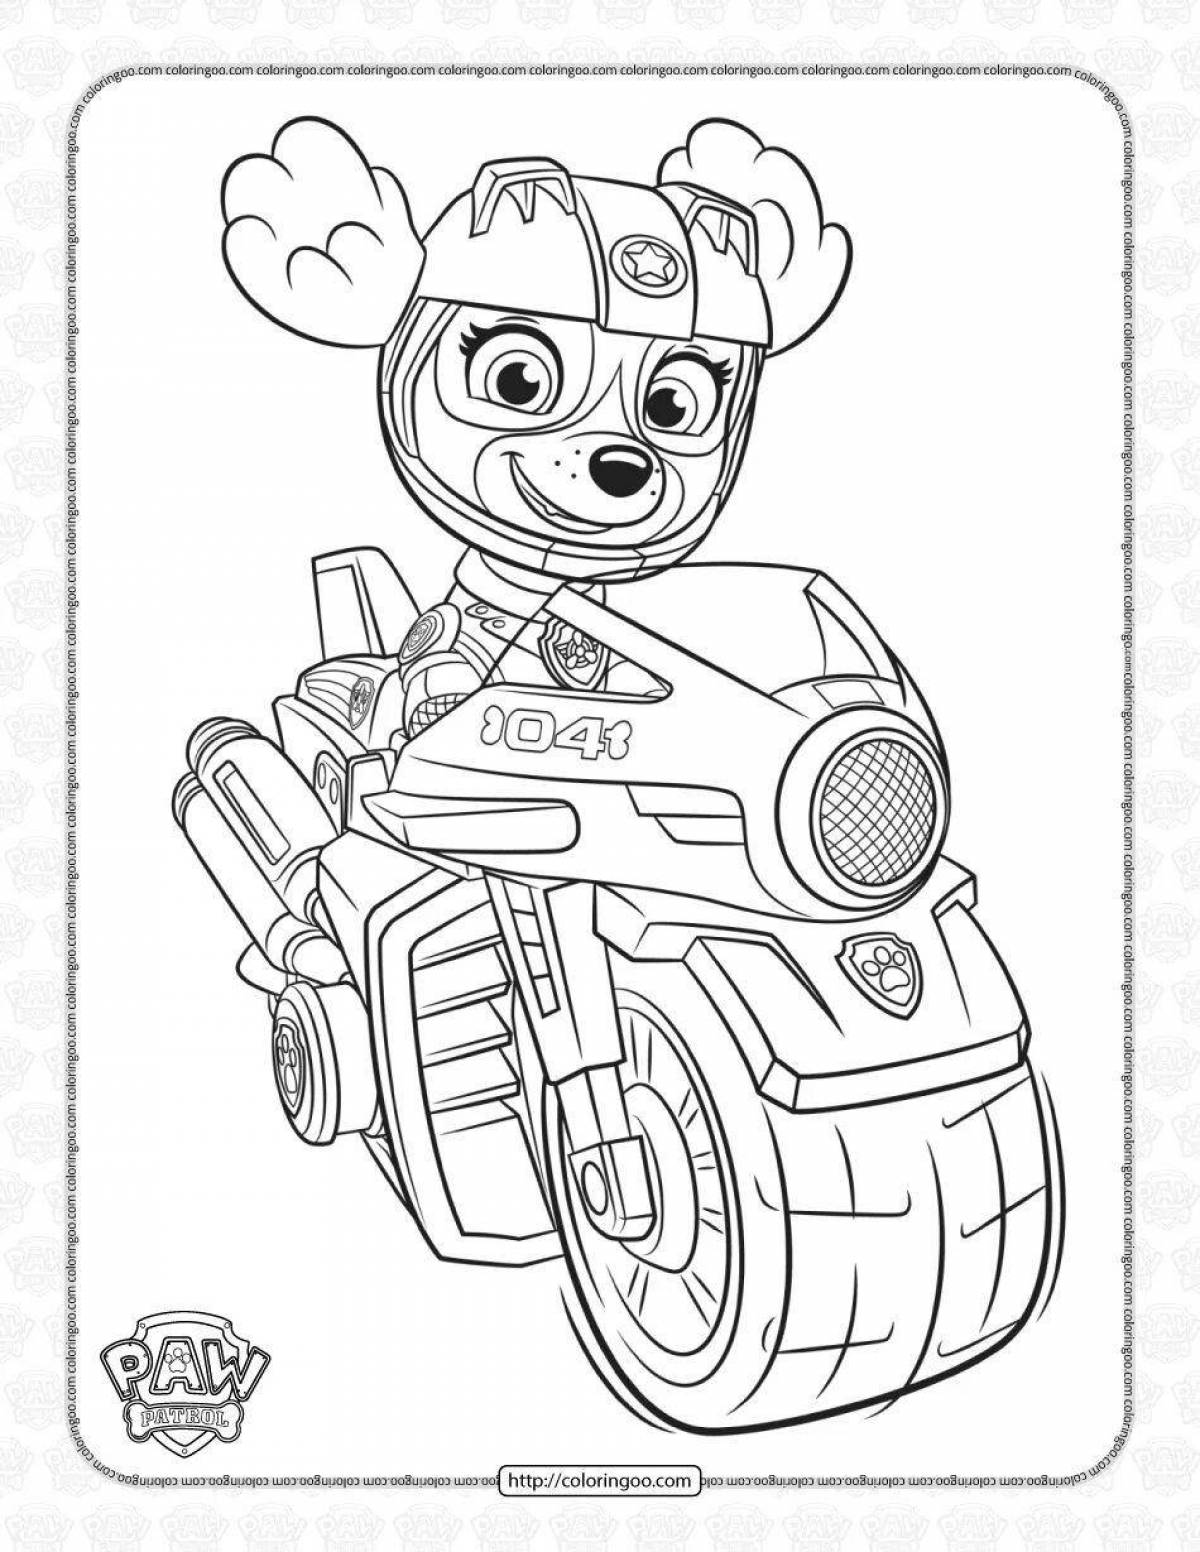 Awesome paw patrol coloring page